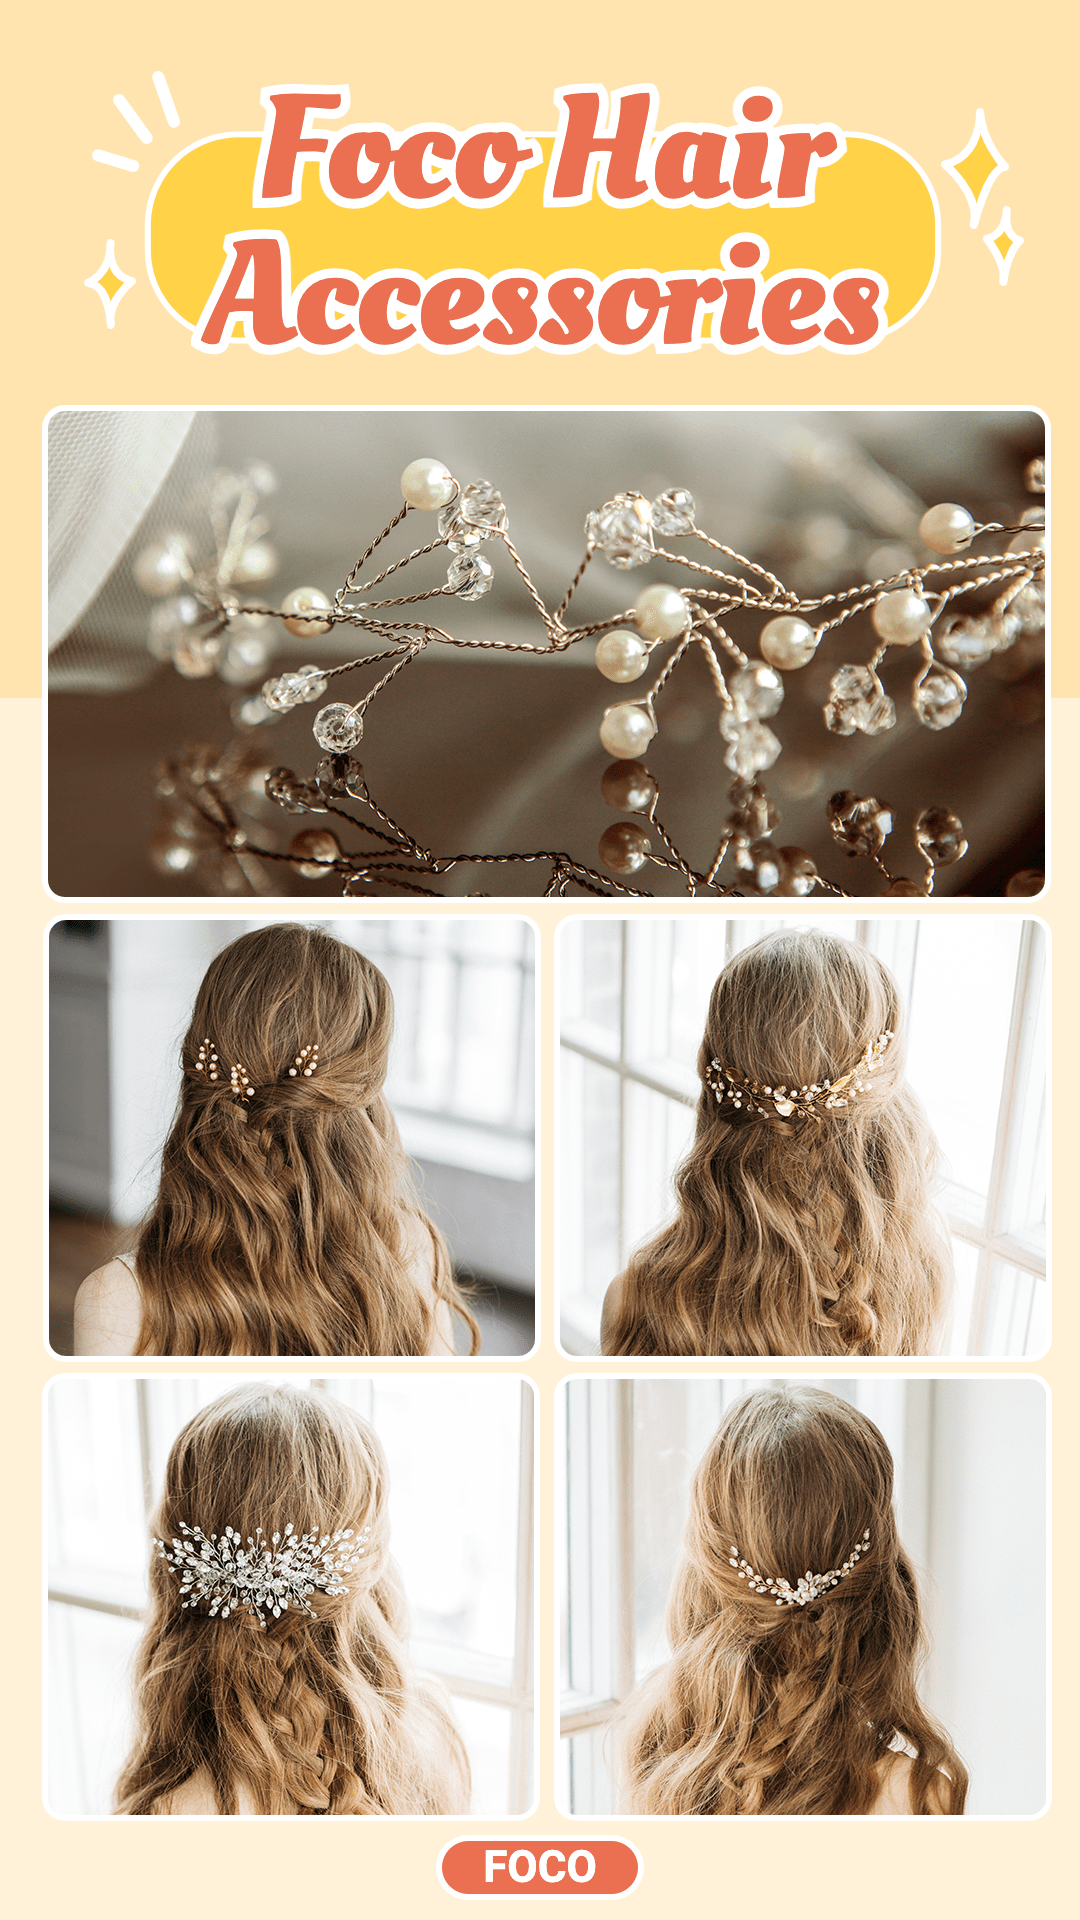 Simple Hair Accessories Display Ecommerce Story预览效果